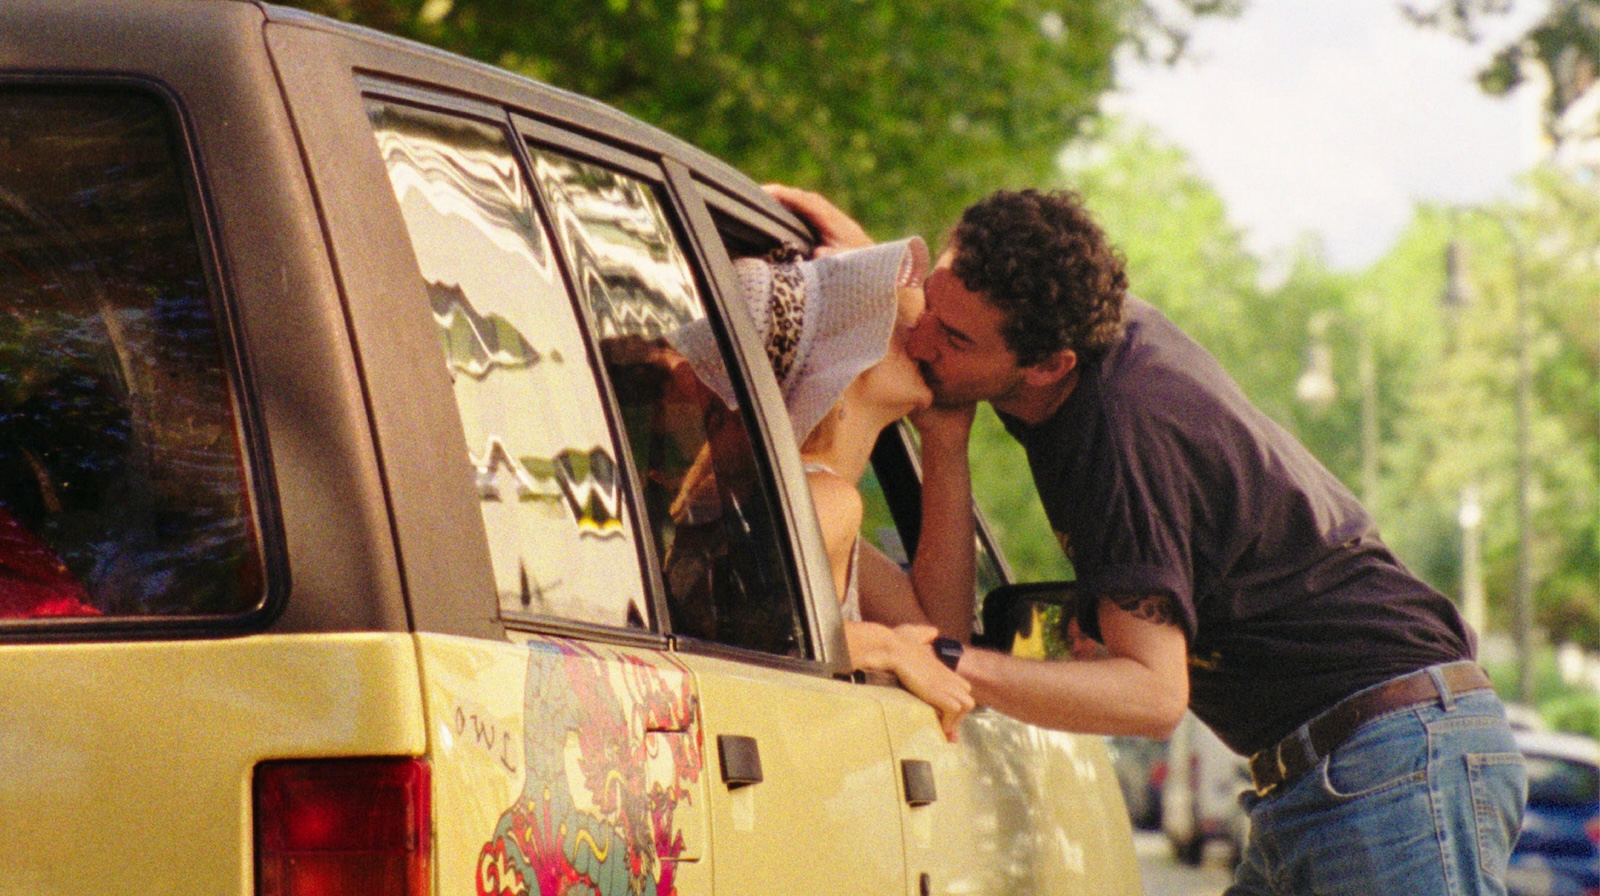 A woman sticks her head out the passenger side of a parked car, kissing a man standing next to the car in a passionate embrace